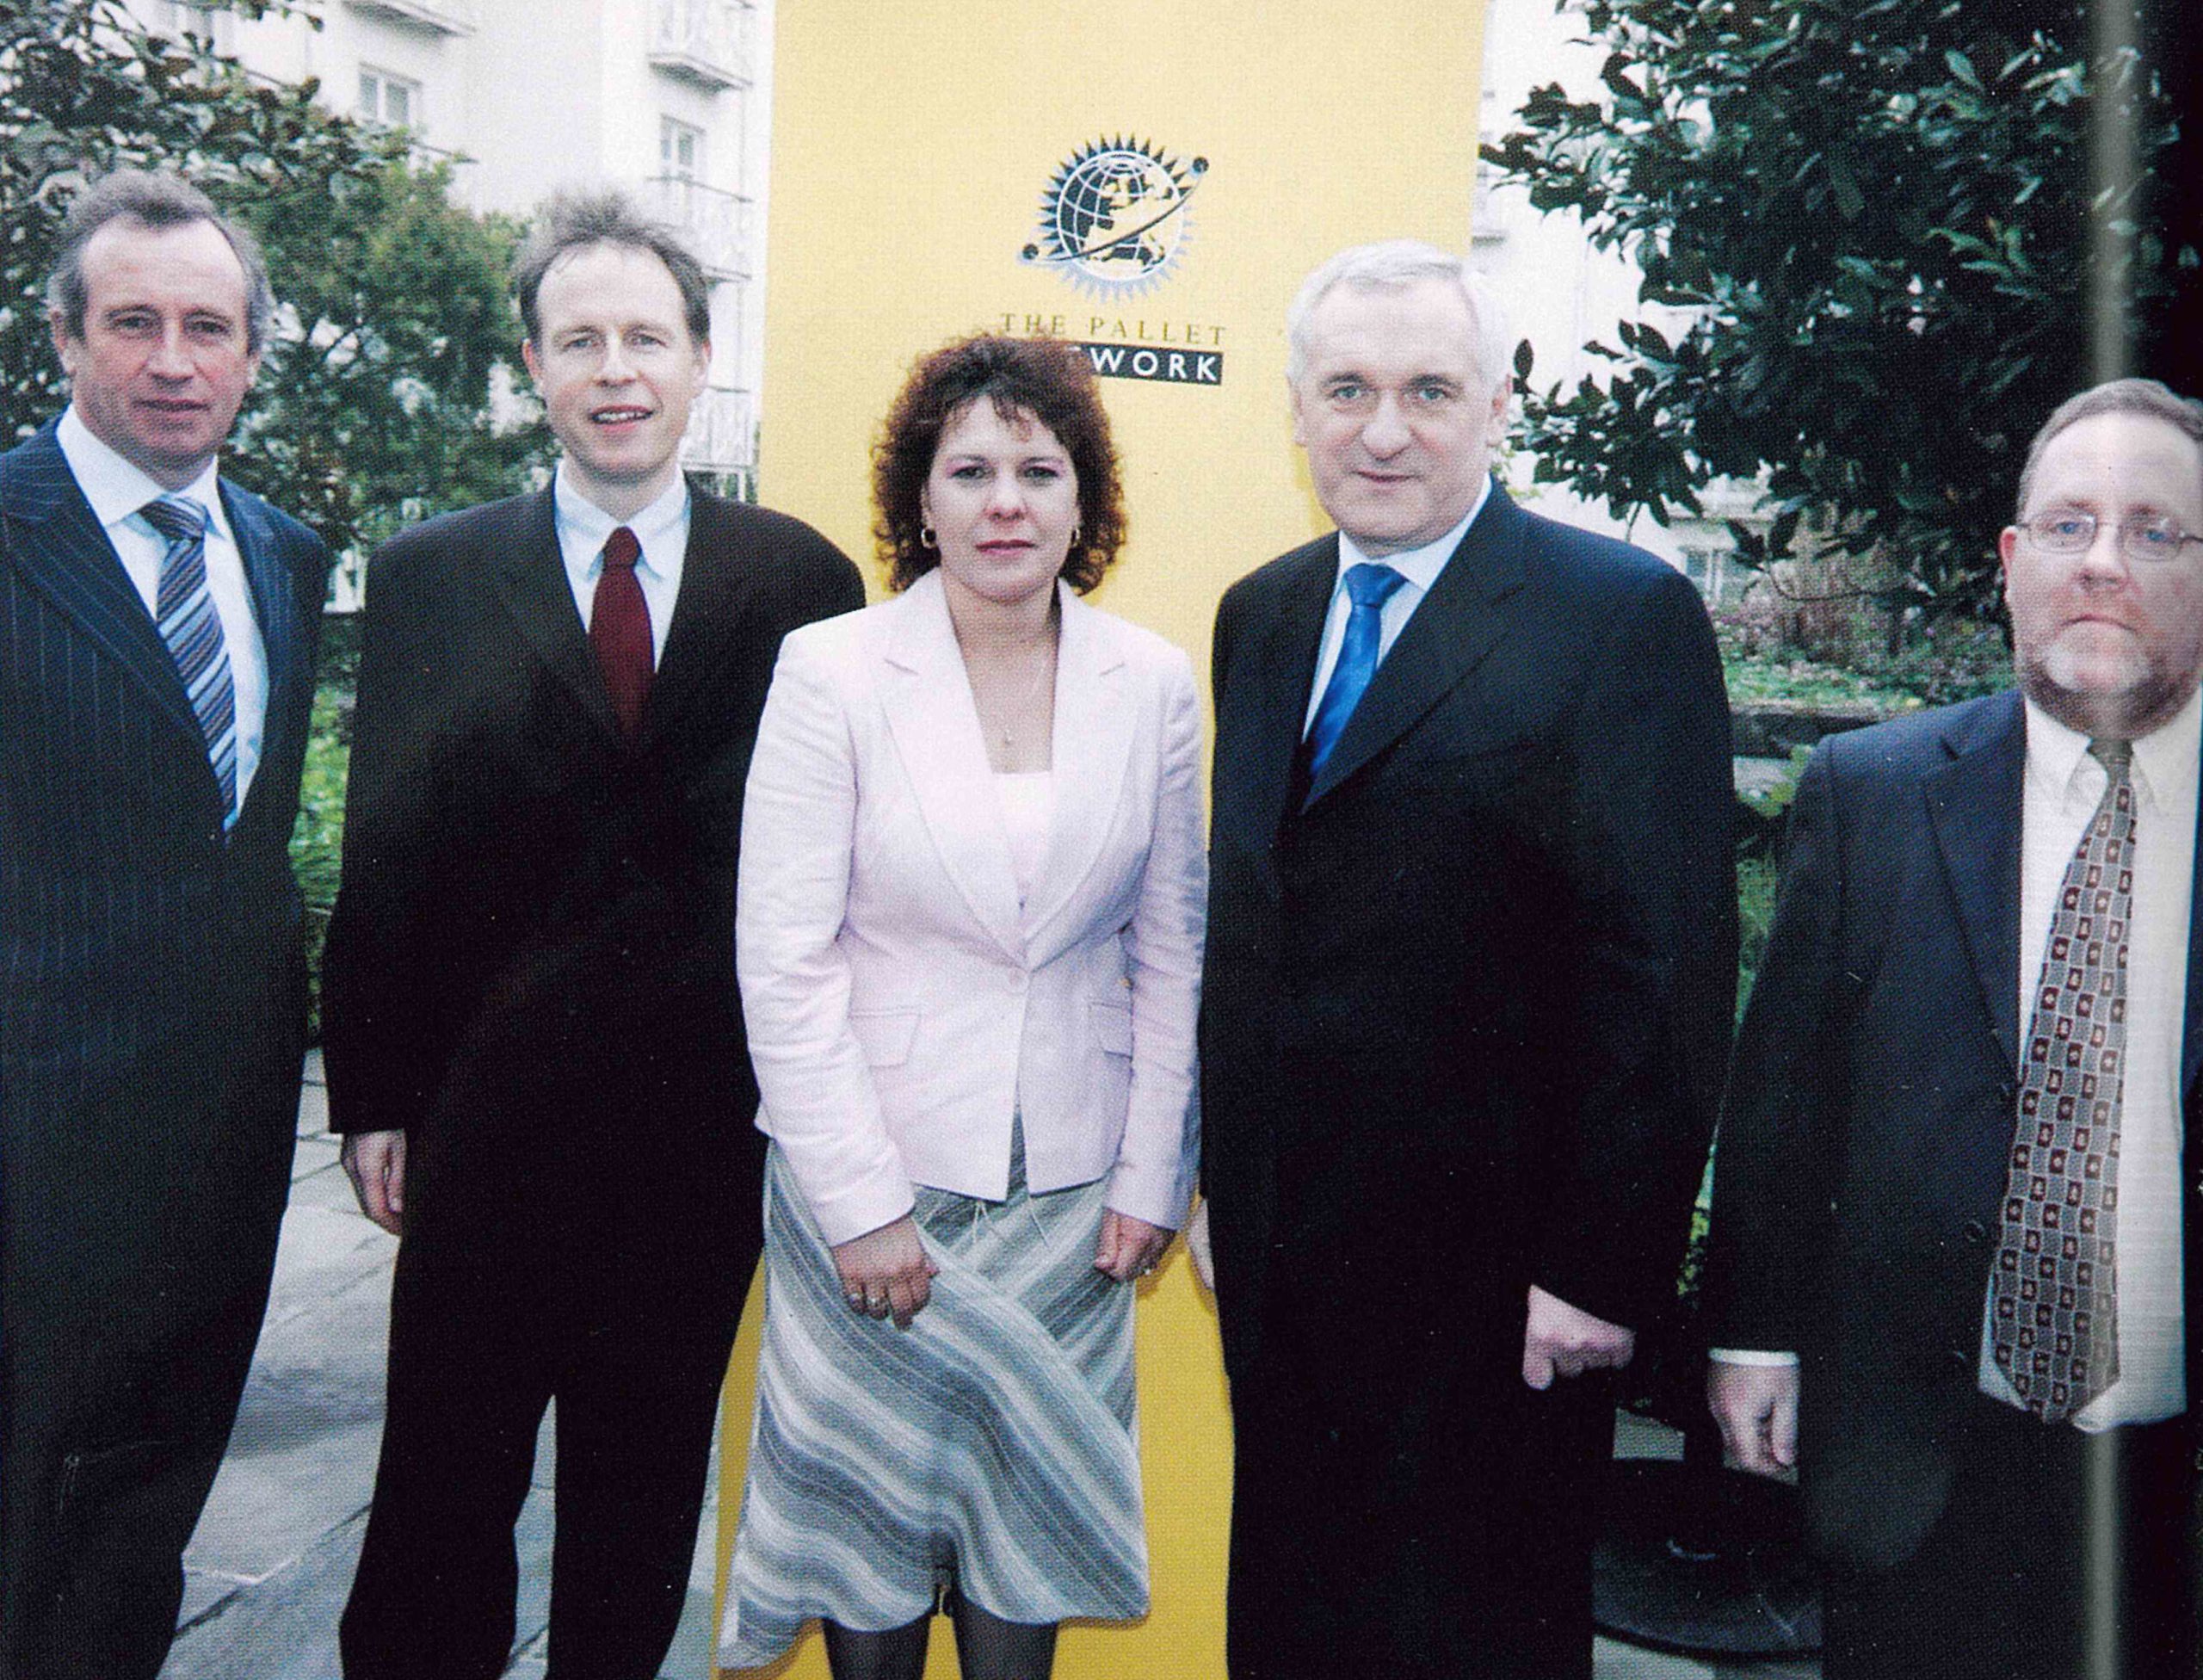 An Taoiseach, Bertie Ahern, at the official launch ceremony of TPN in 2005, with (L to R) Owen Cooke, Seamus McGowan, Aurora Drake, and Gary Costelloe.